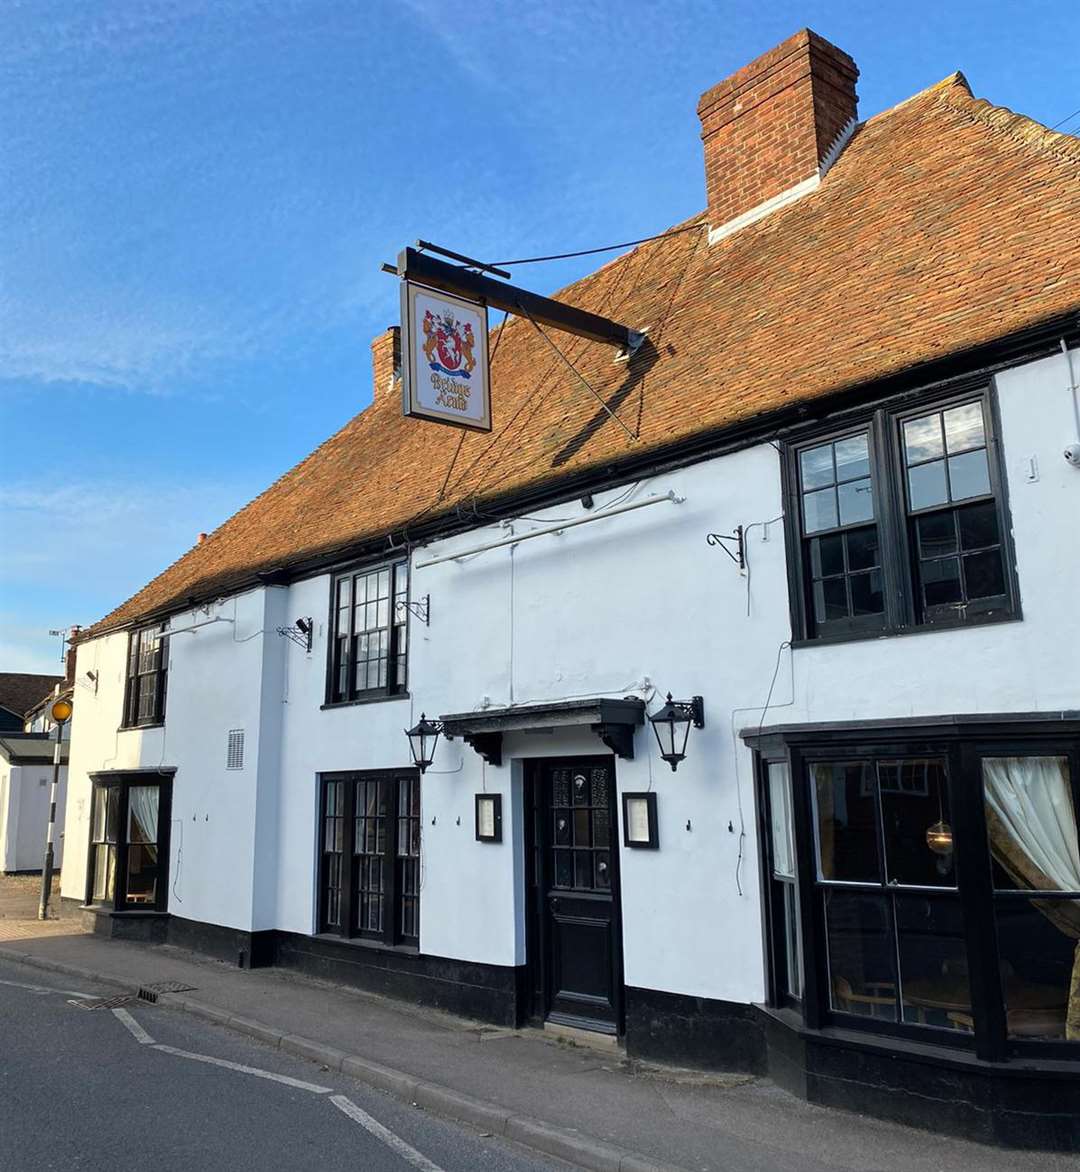 The Bridge Arms pub is close to the property. Picture: The Bridge Arms